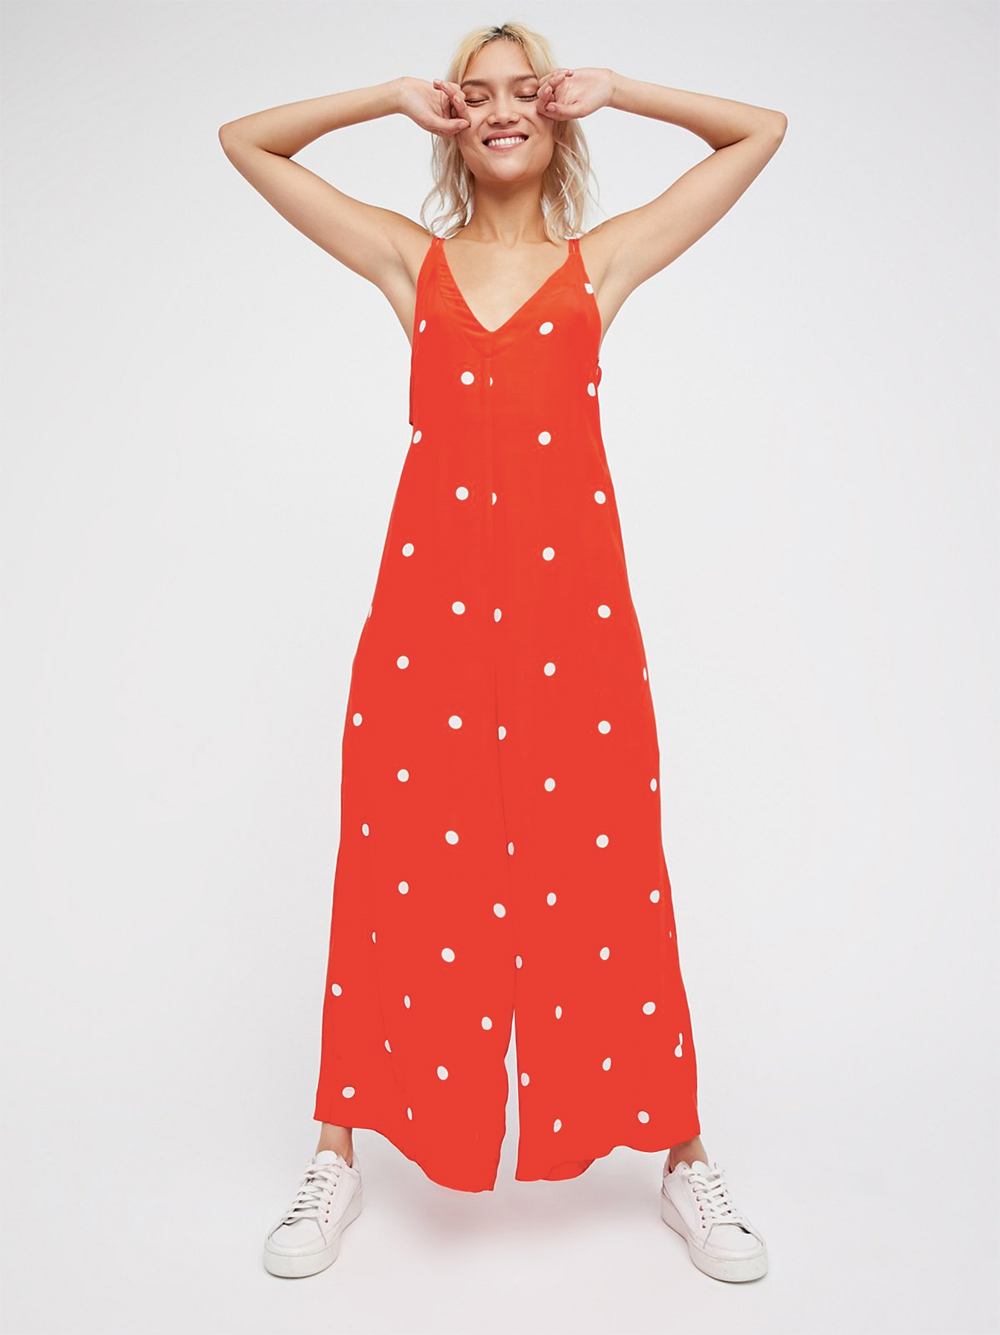 polka dress outfit